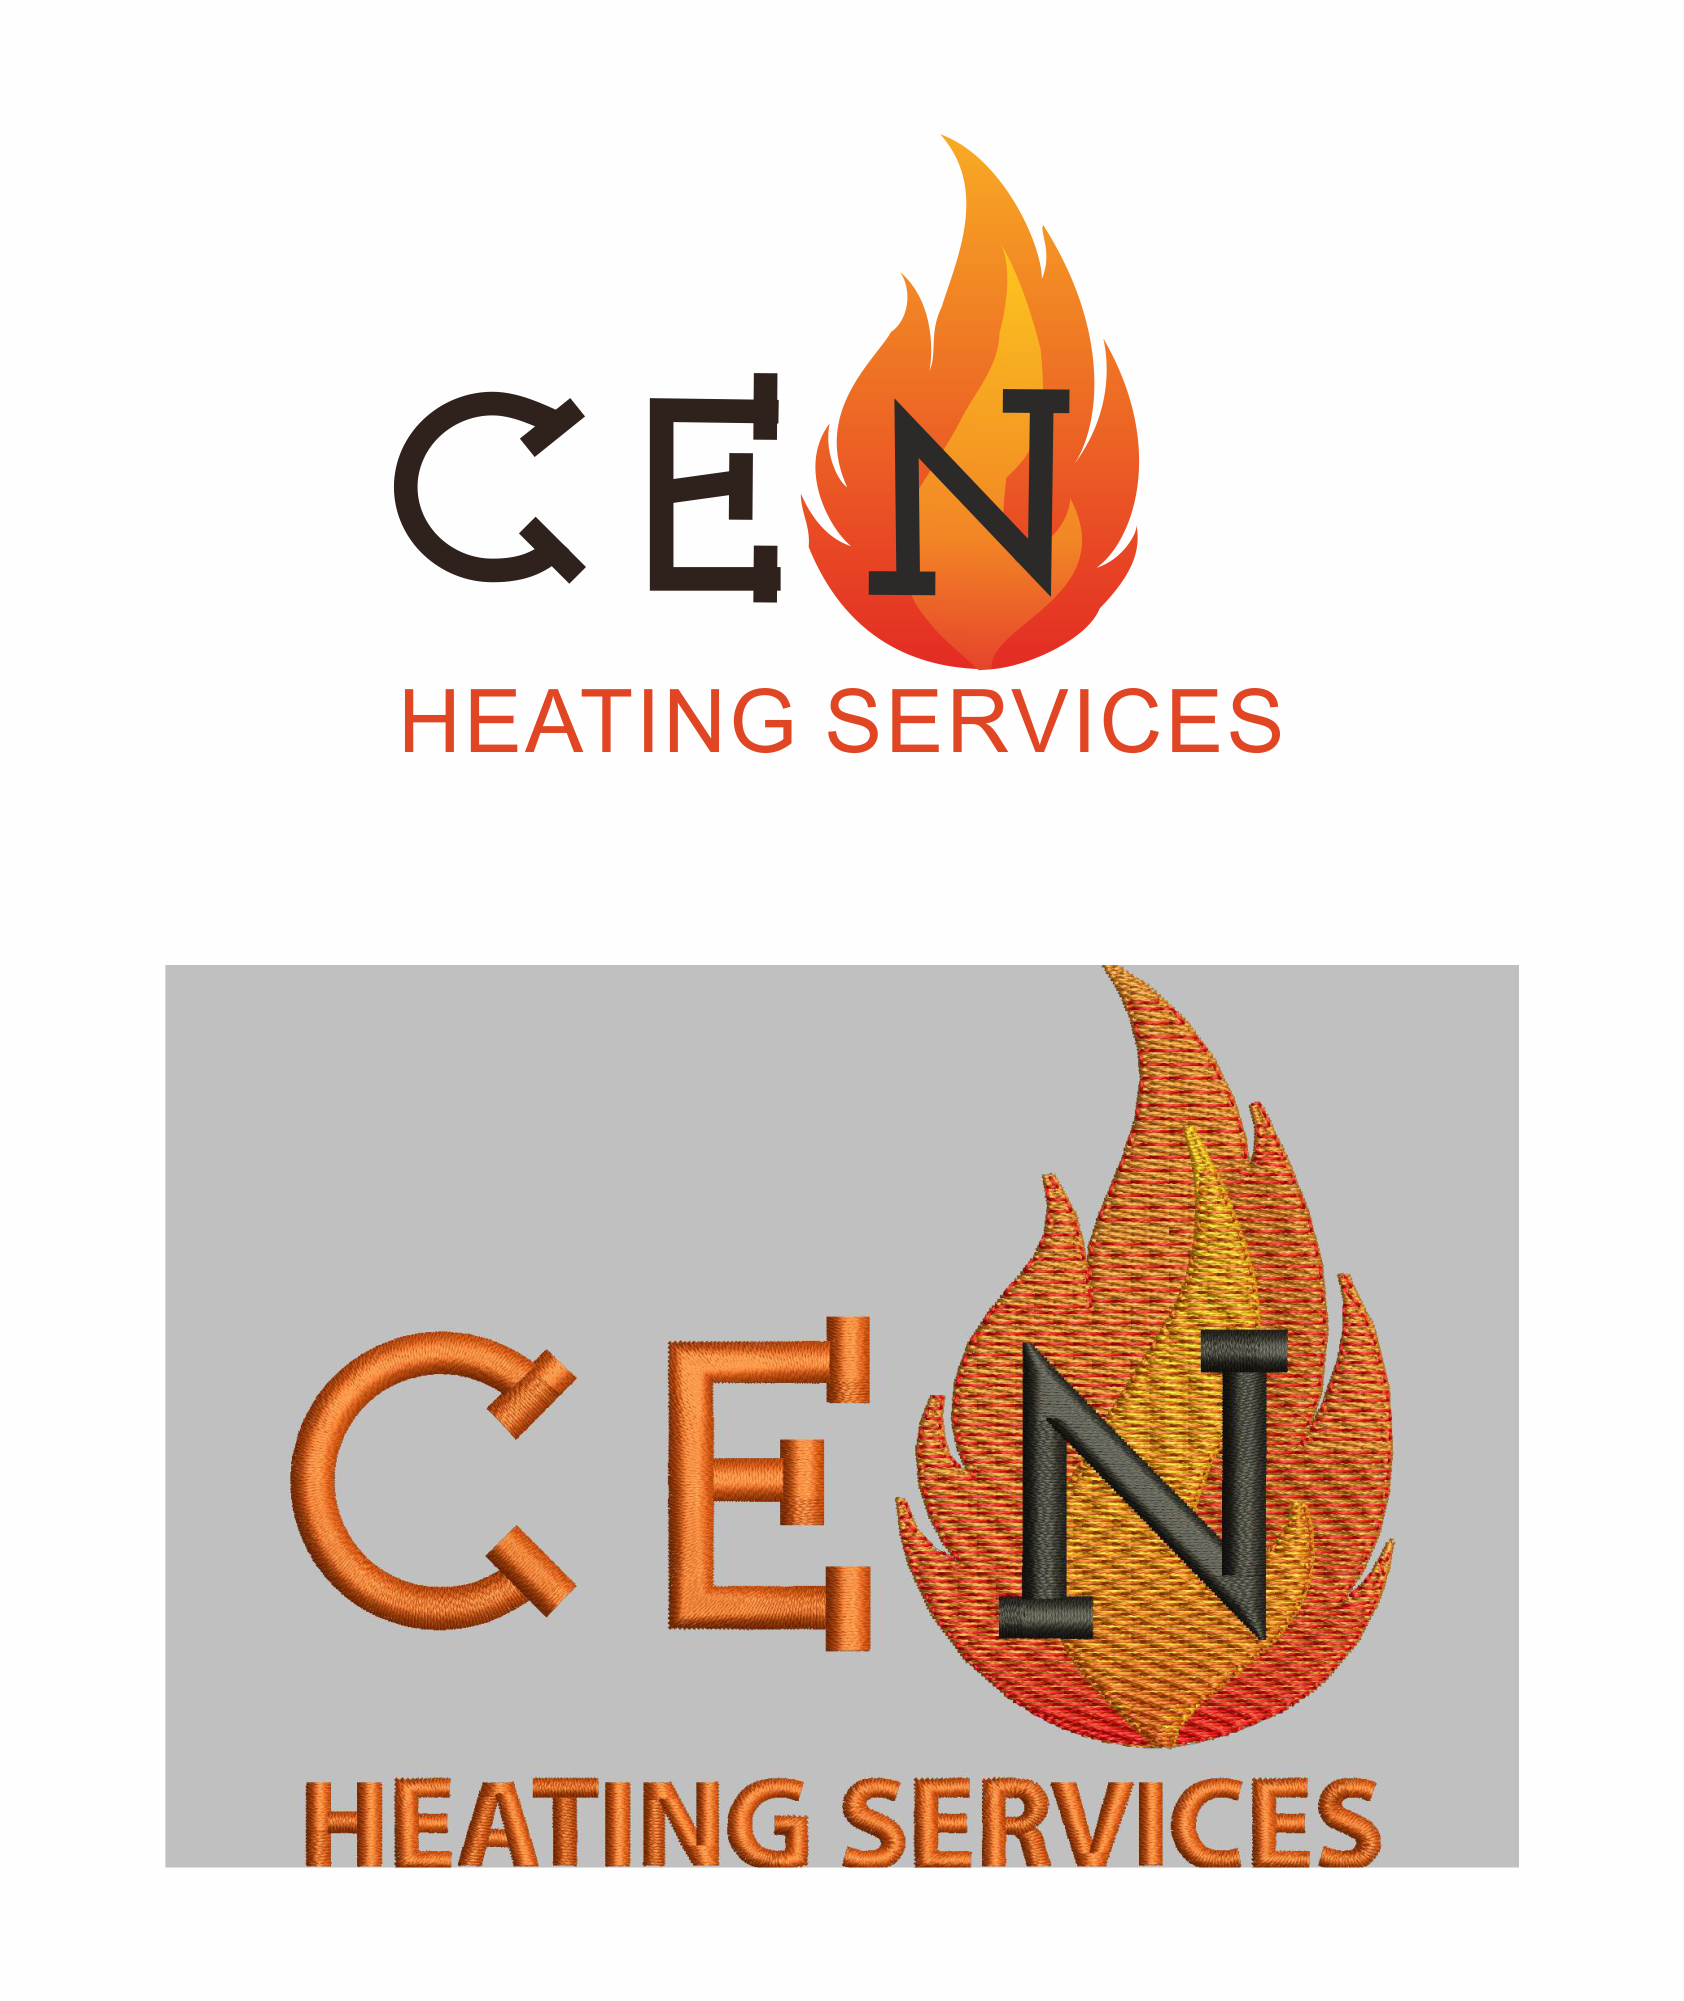 cen_heating_services.png